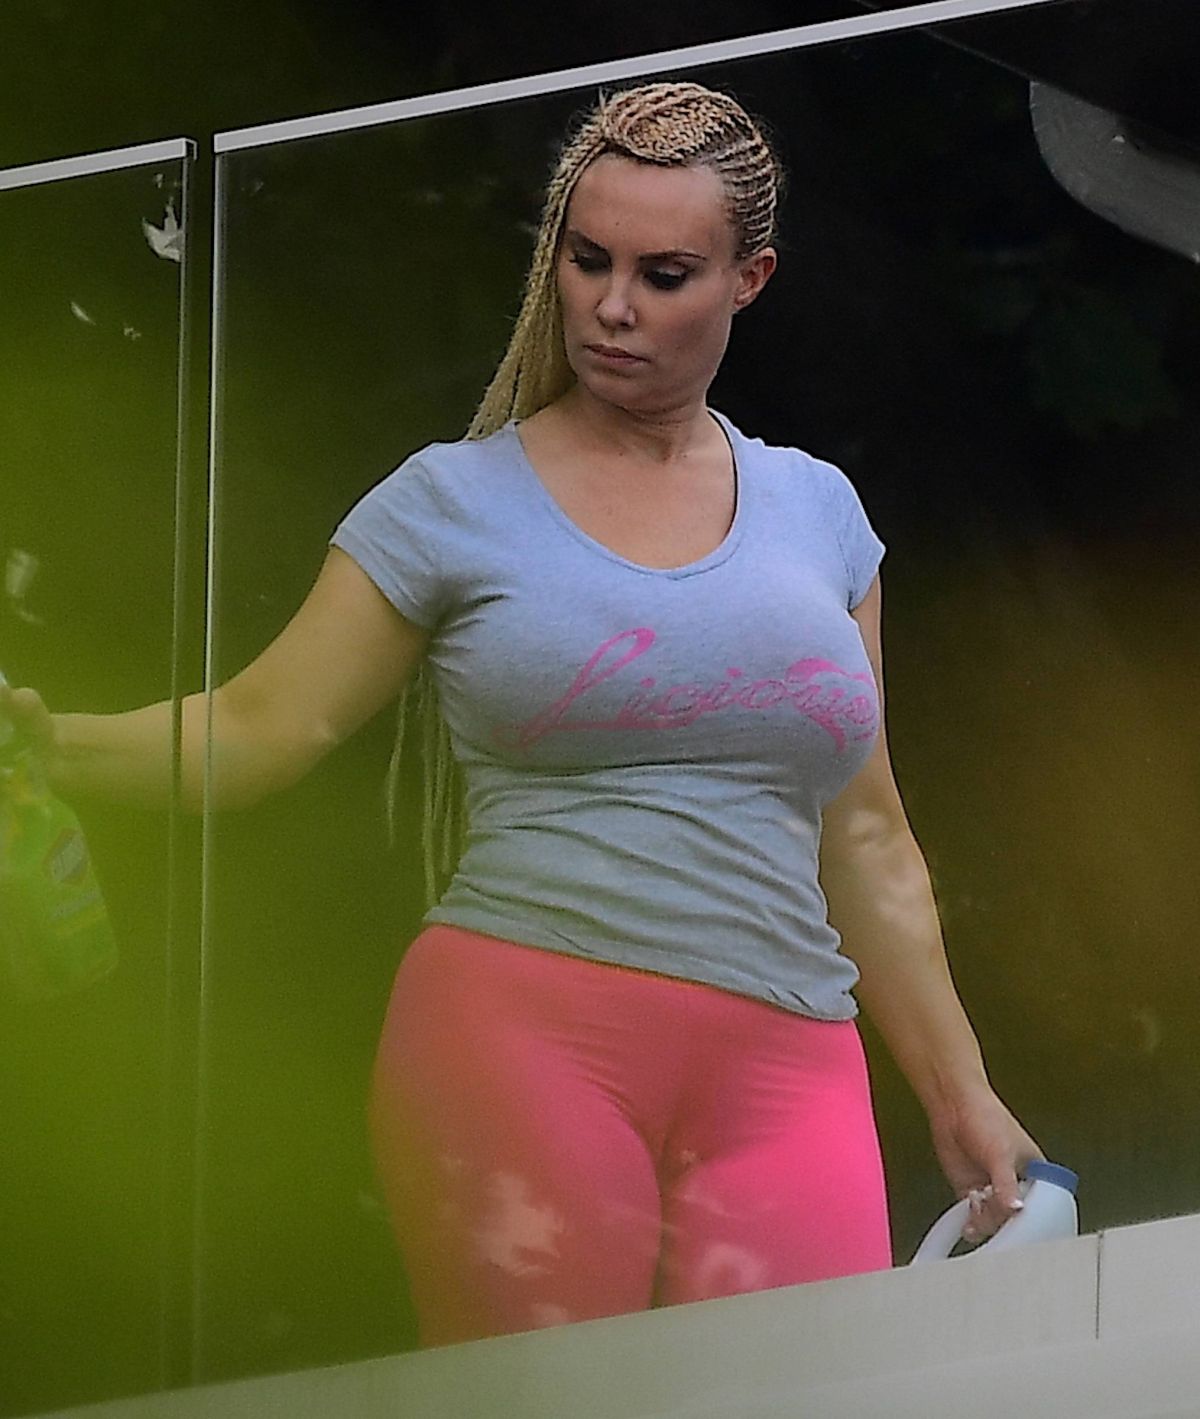 NICOLE COCO AUSTIN at Her Apartment in New Yersey 07/25/2017.